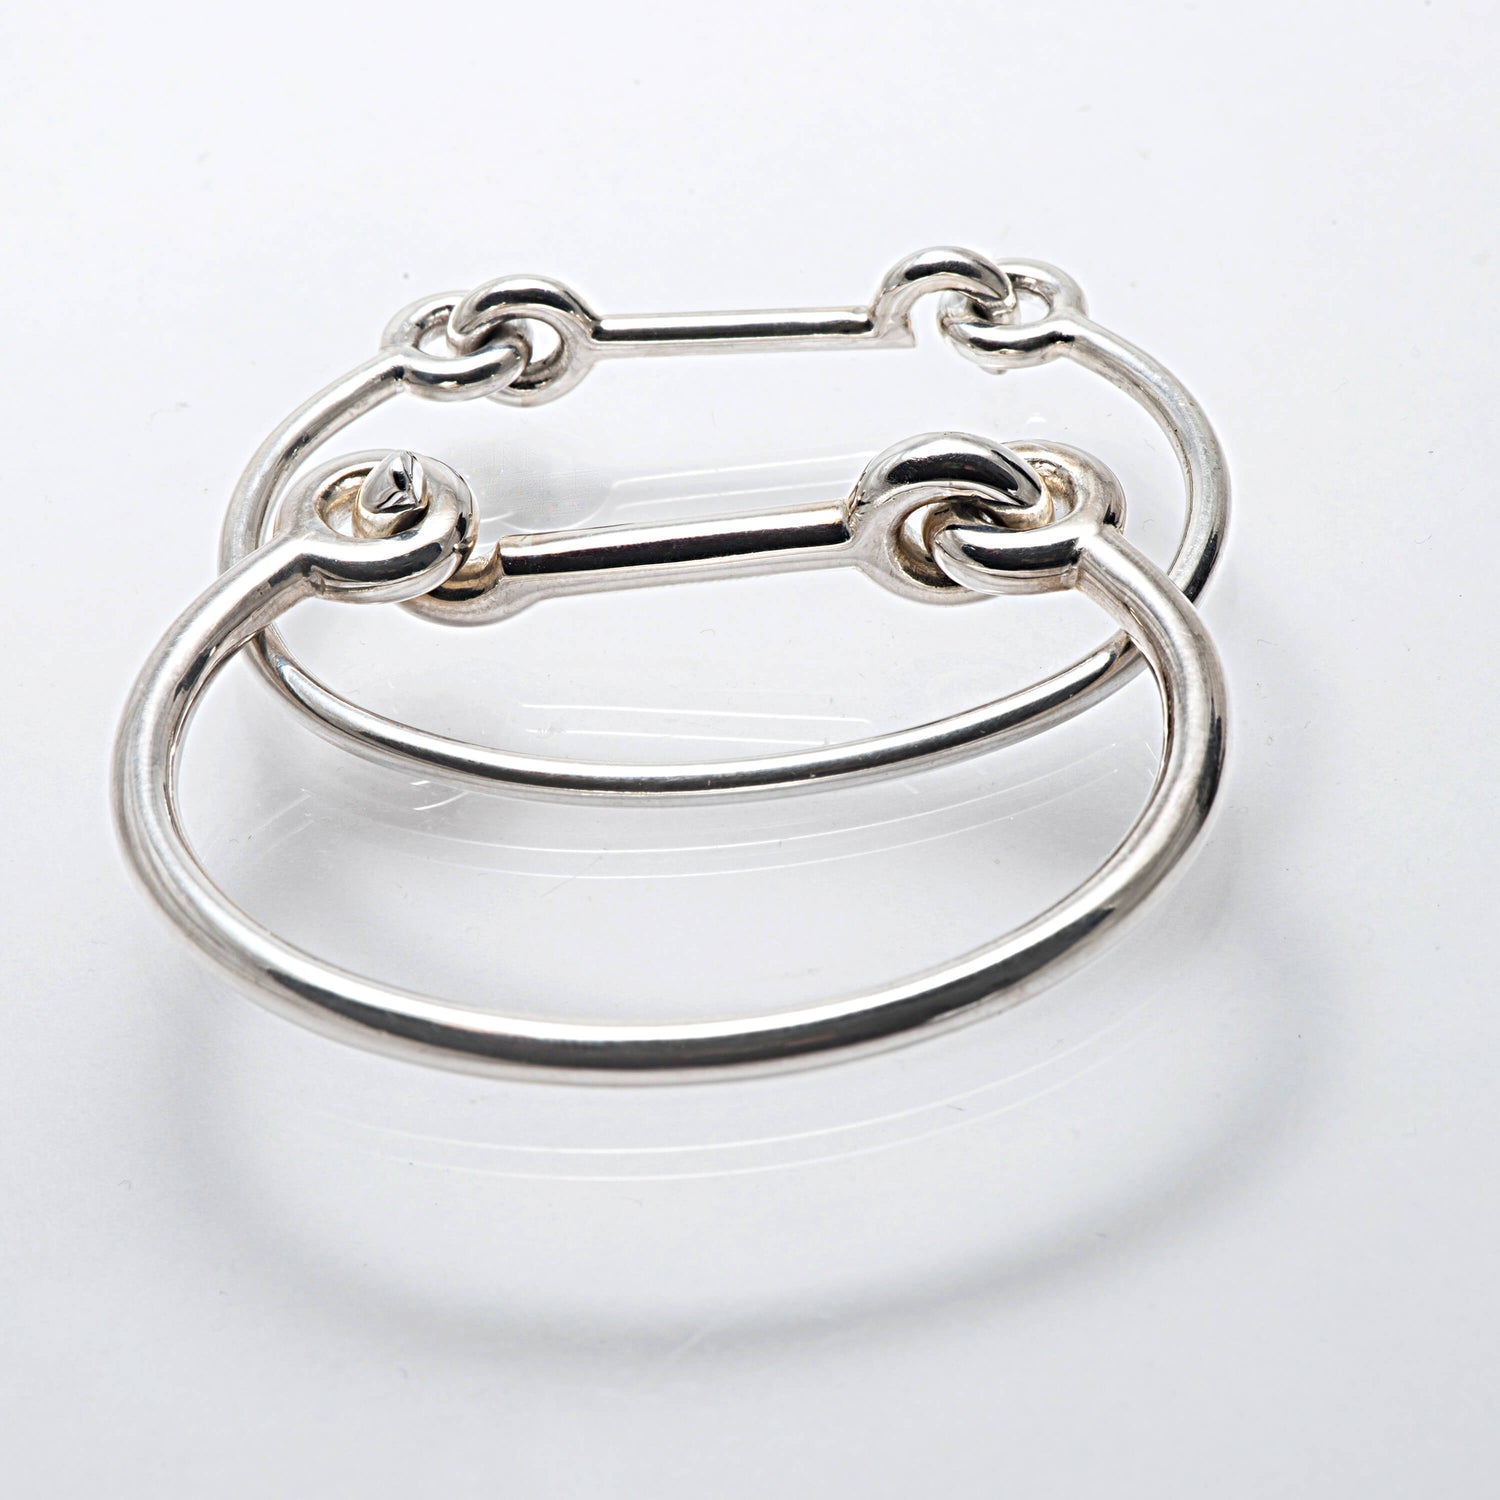 Solid Sterling Silver Snap Bangle